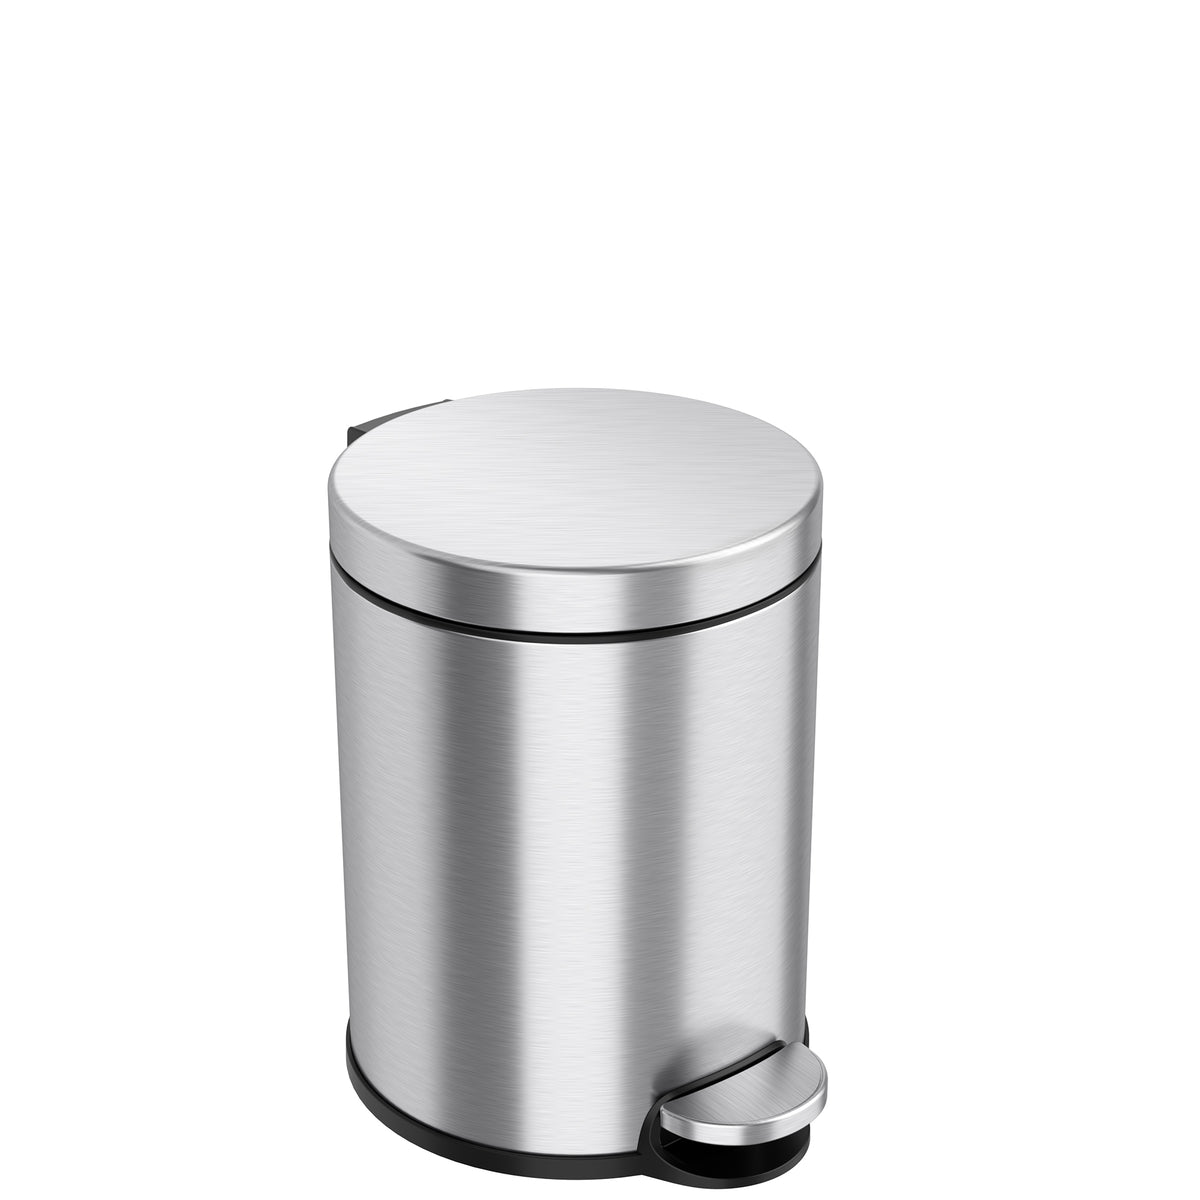 Glad Small Trash Can, 1.2 Gallon , Round Stainless Steel Garbage Bin with Soft Close Lid & Step Foot Pedal , Metal Waste Basket with Removable Inner